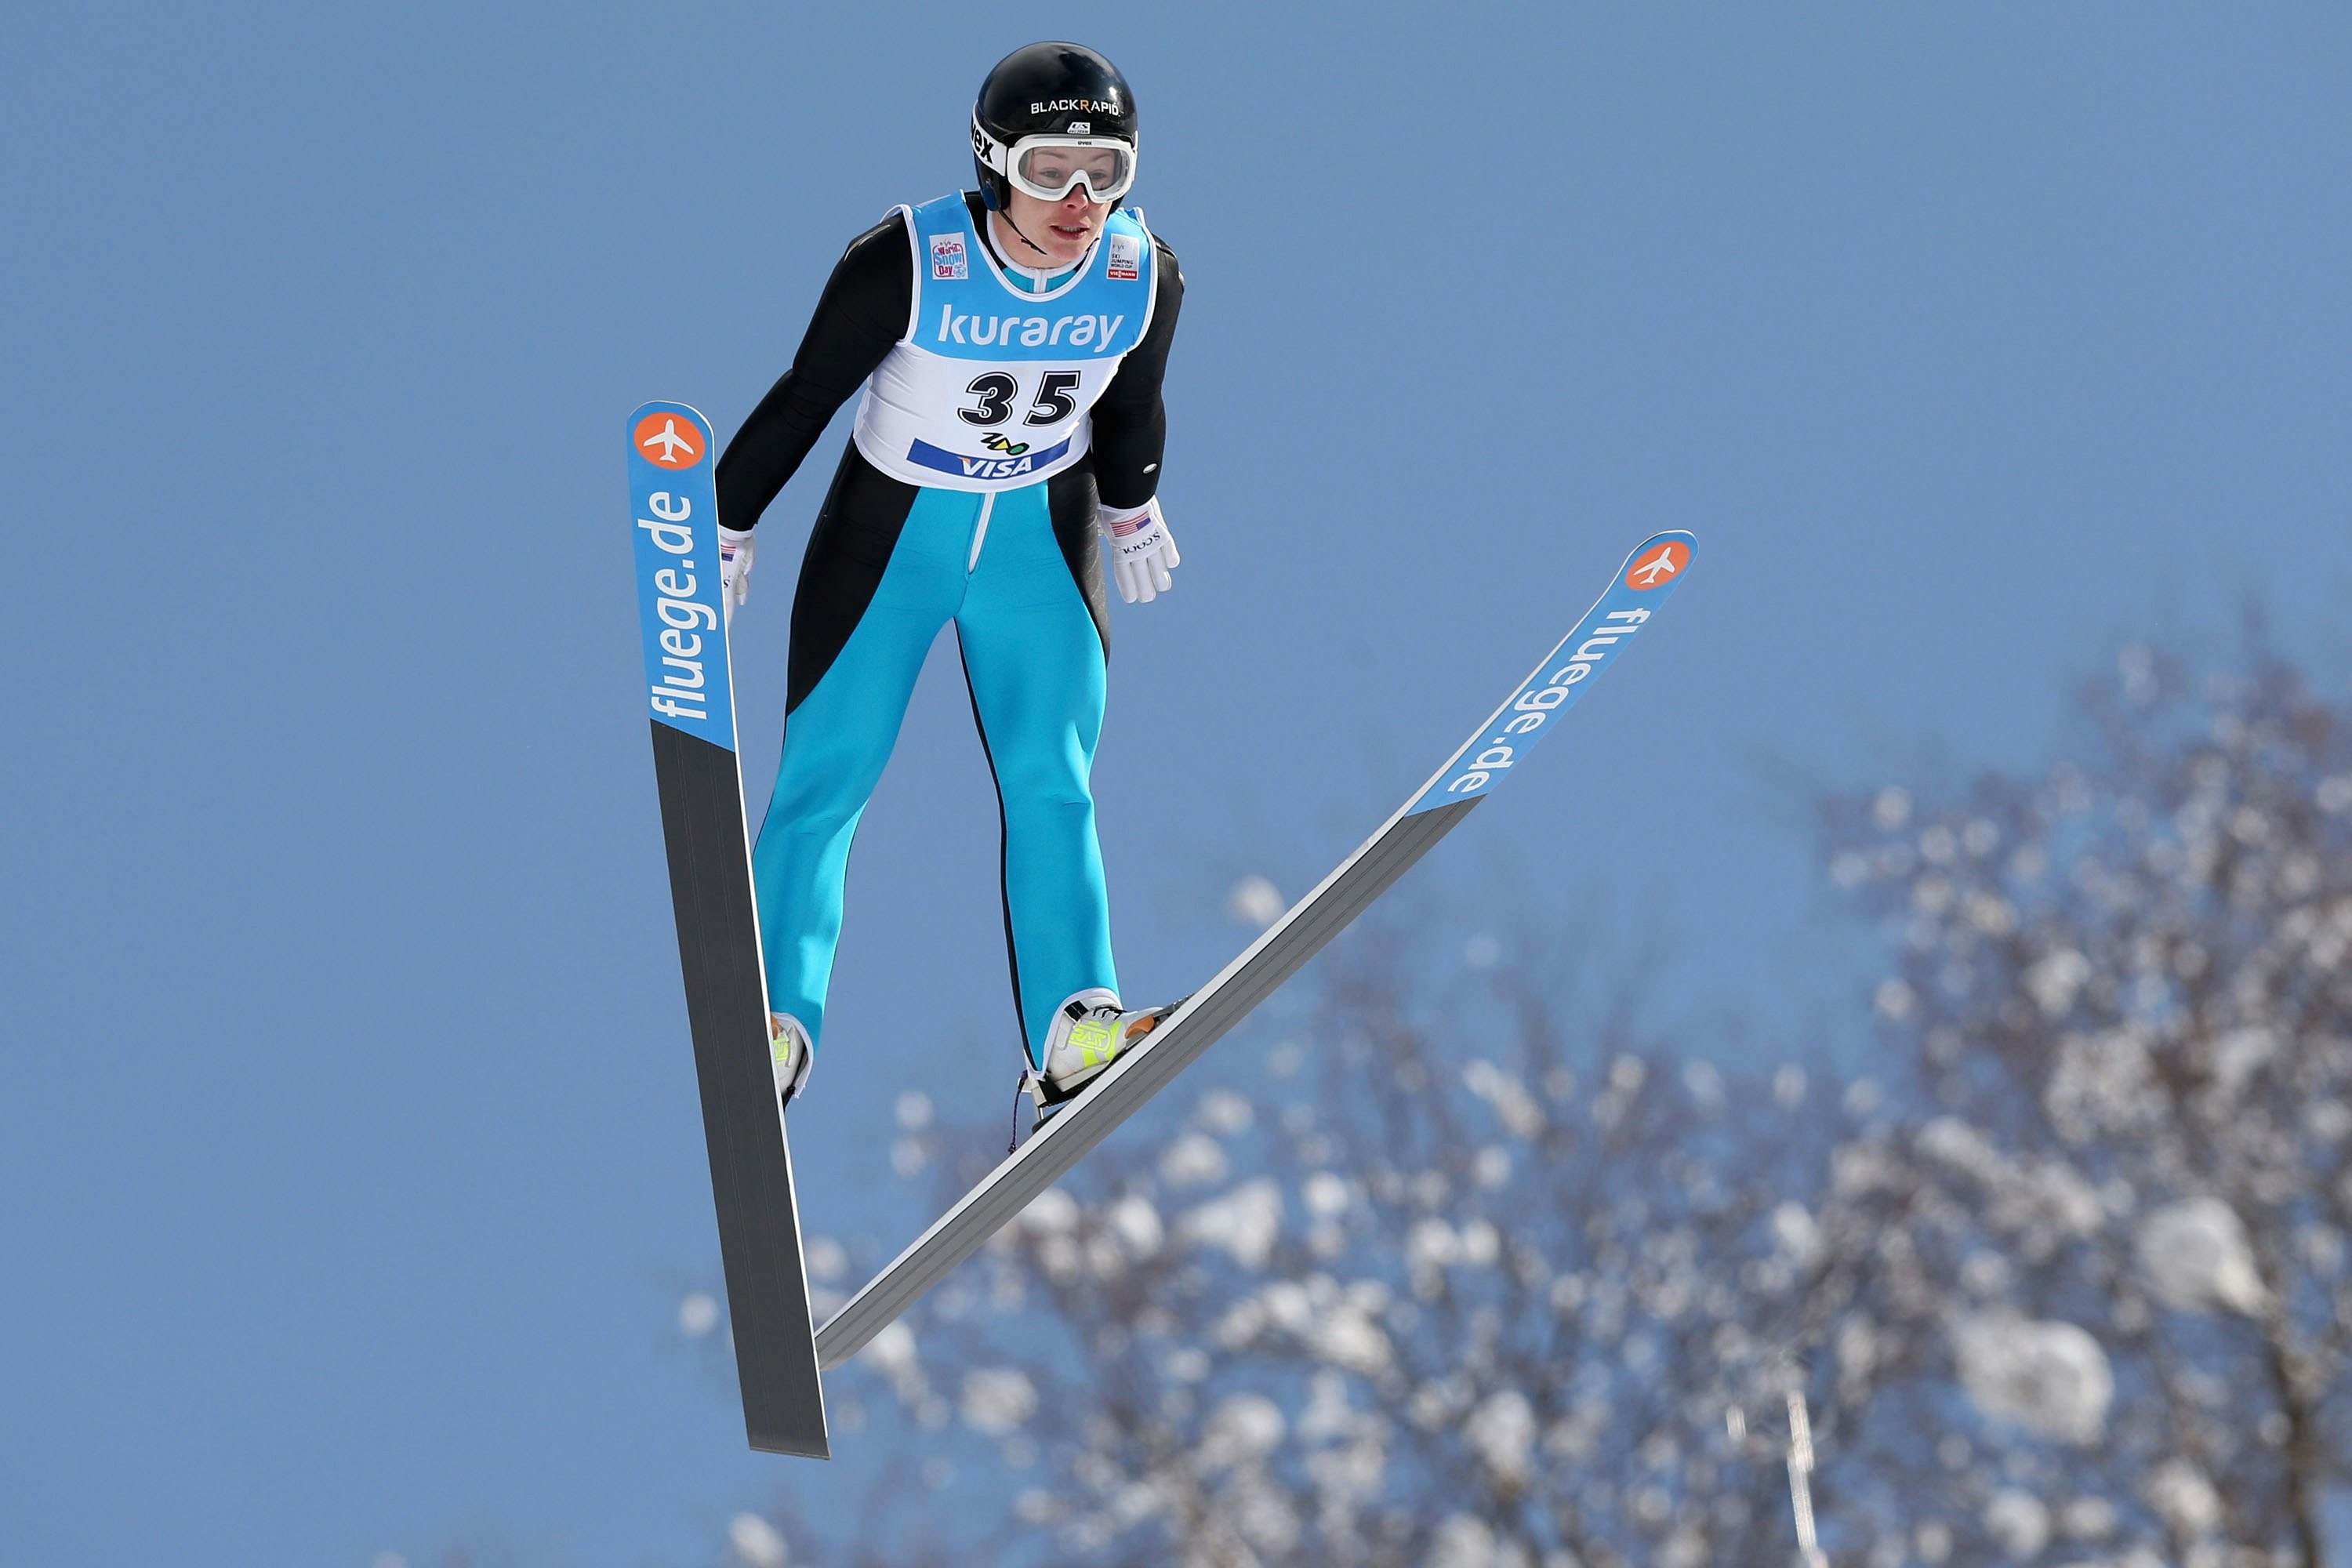 Sochi Olympics Ski Jumper Lindsey Van 5 Awesome Facts About The intended for Ski Jumping Death Rate